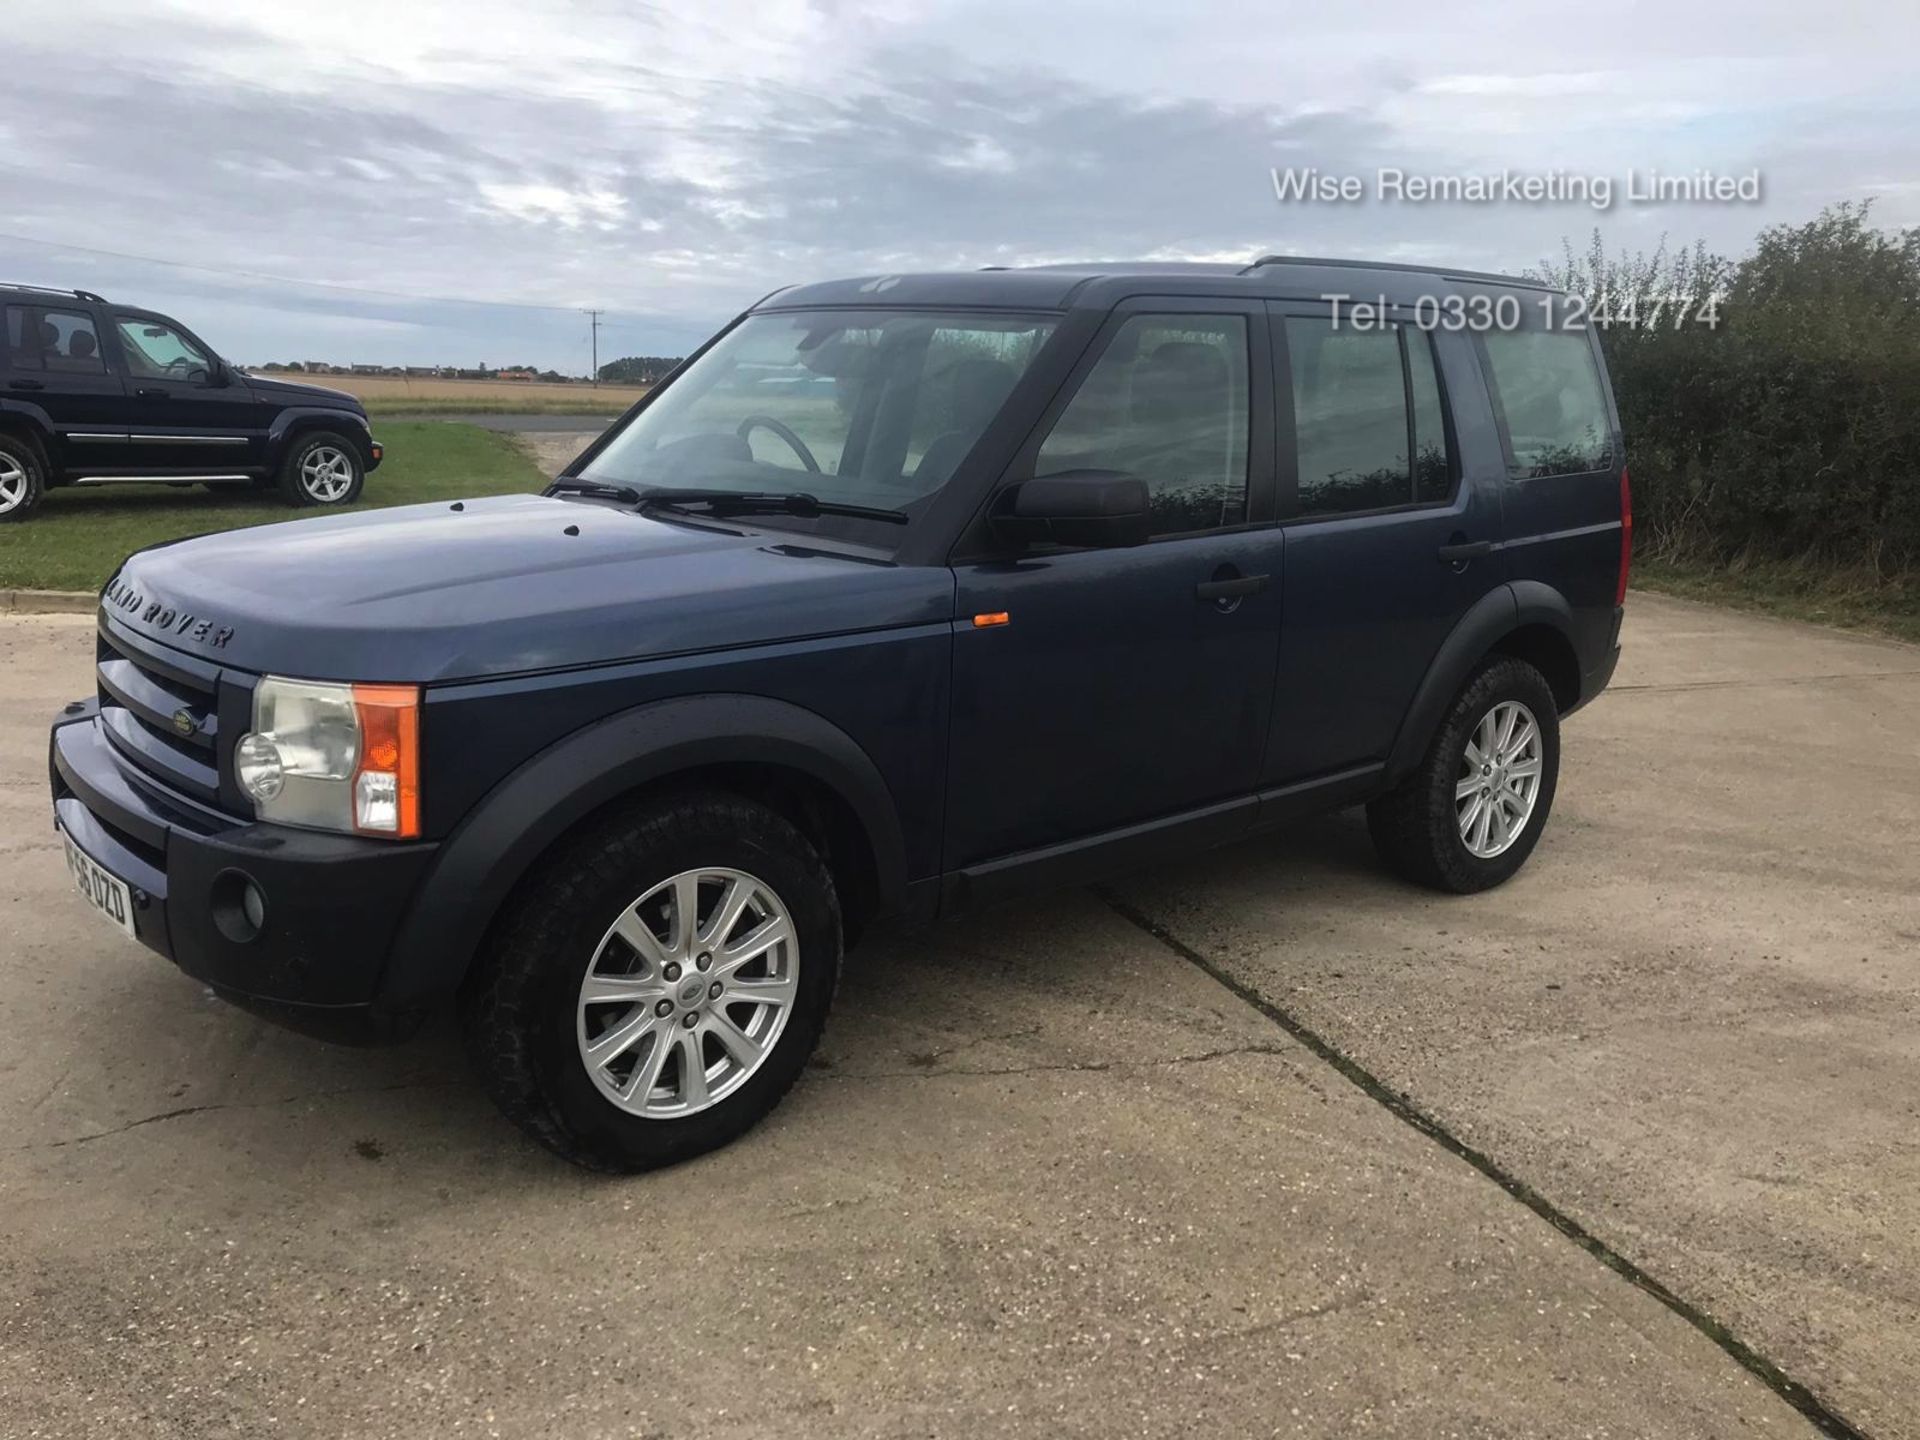 Land Rover Discovery 2.7 TdV6 Special Equipment - Automatic (2007 Model) Full Leather - Elec Sunroof